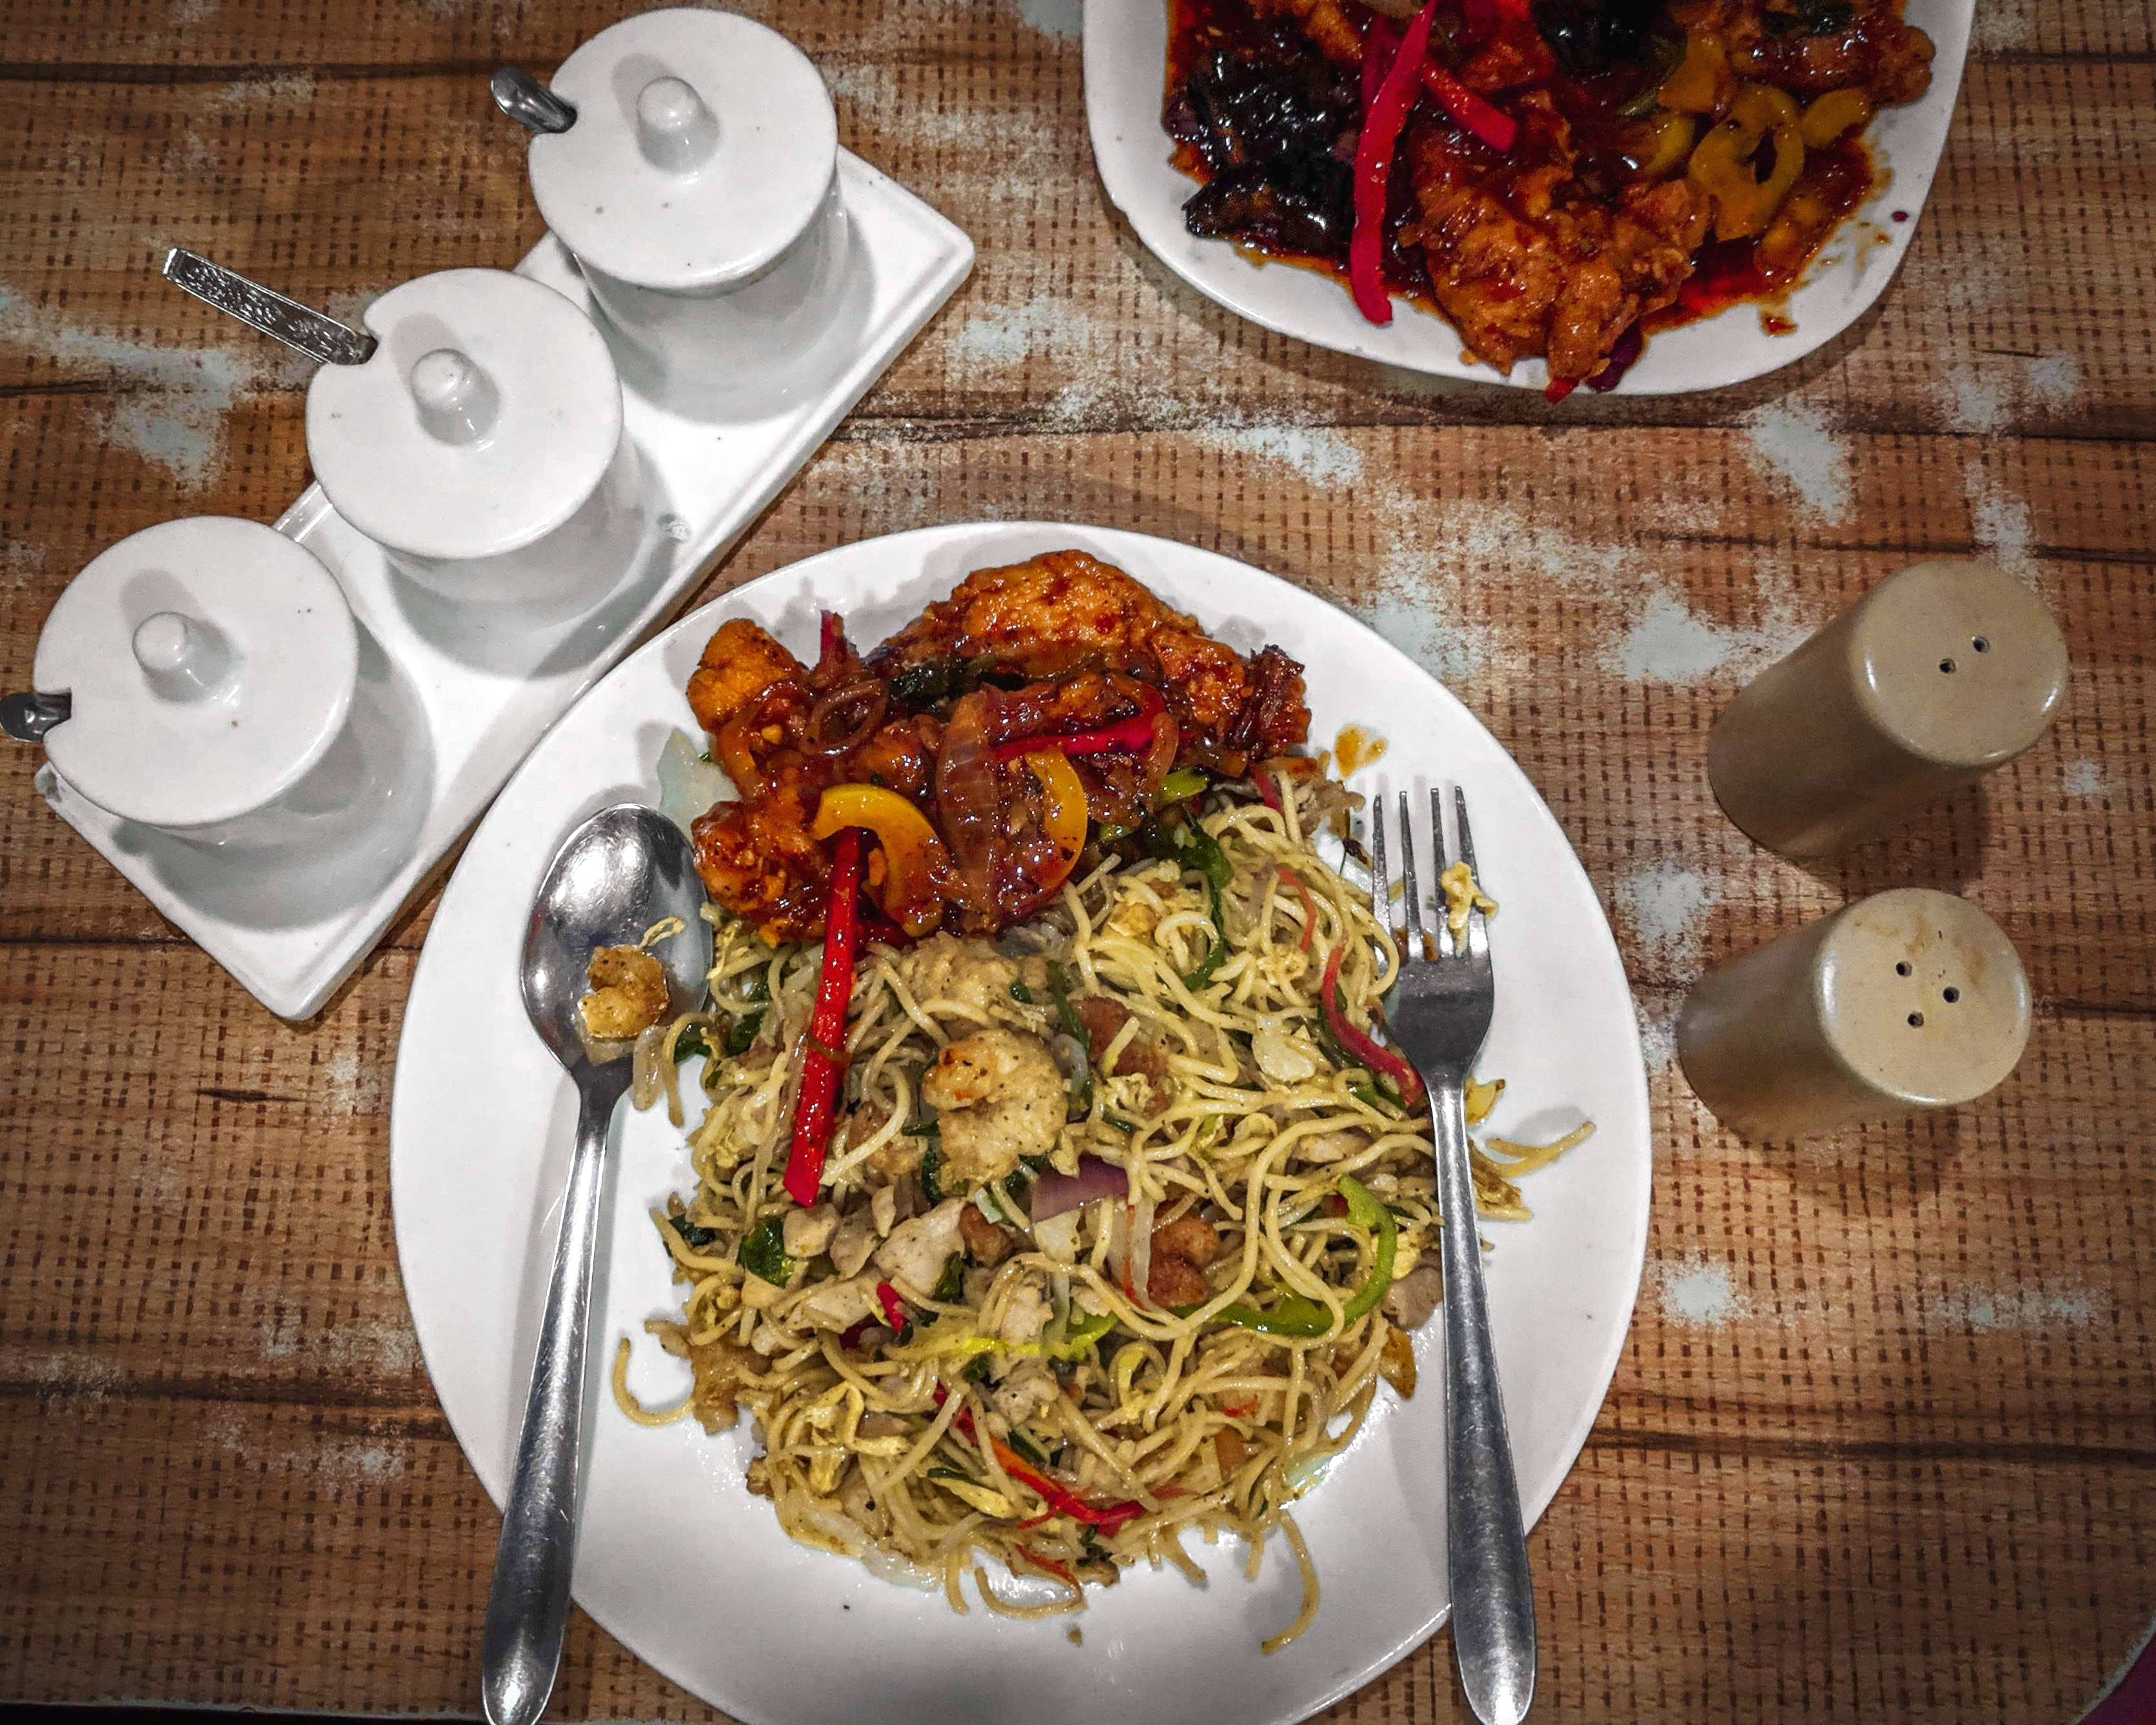 Food,Dish,Cuisine,Meal,Spaghetti,Fried noodles,Ingredient,Pancit,Mie goreng,Noodle